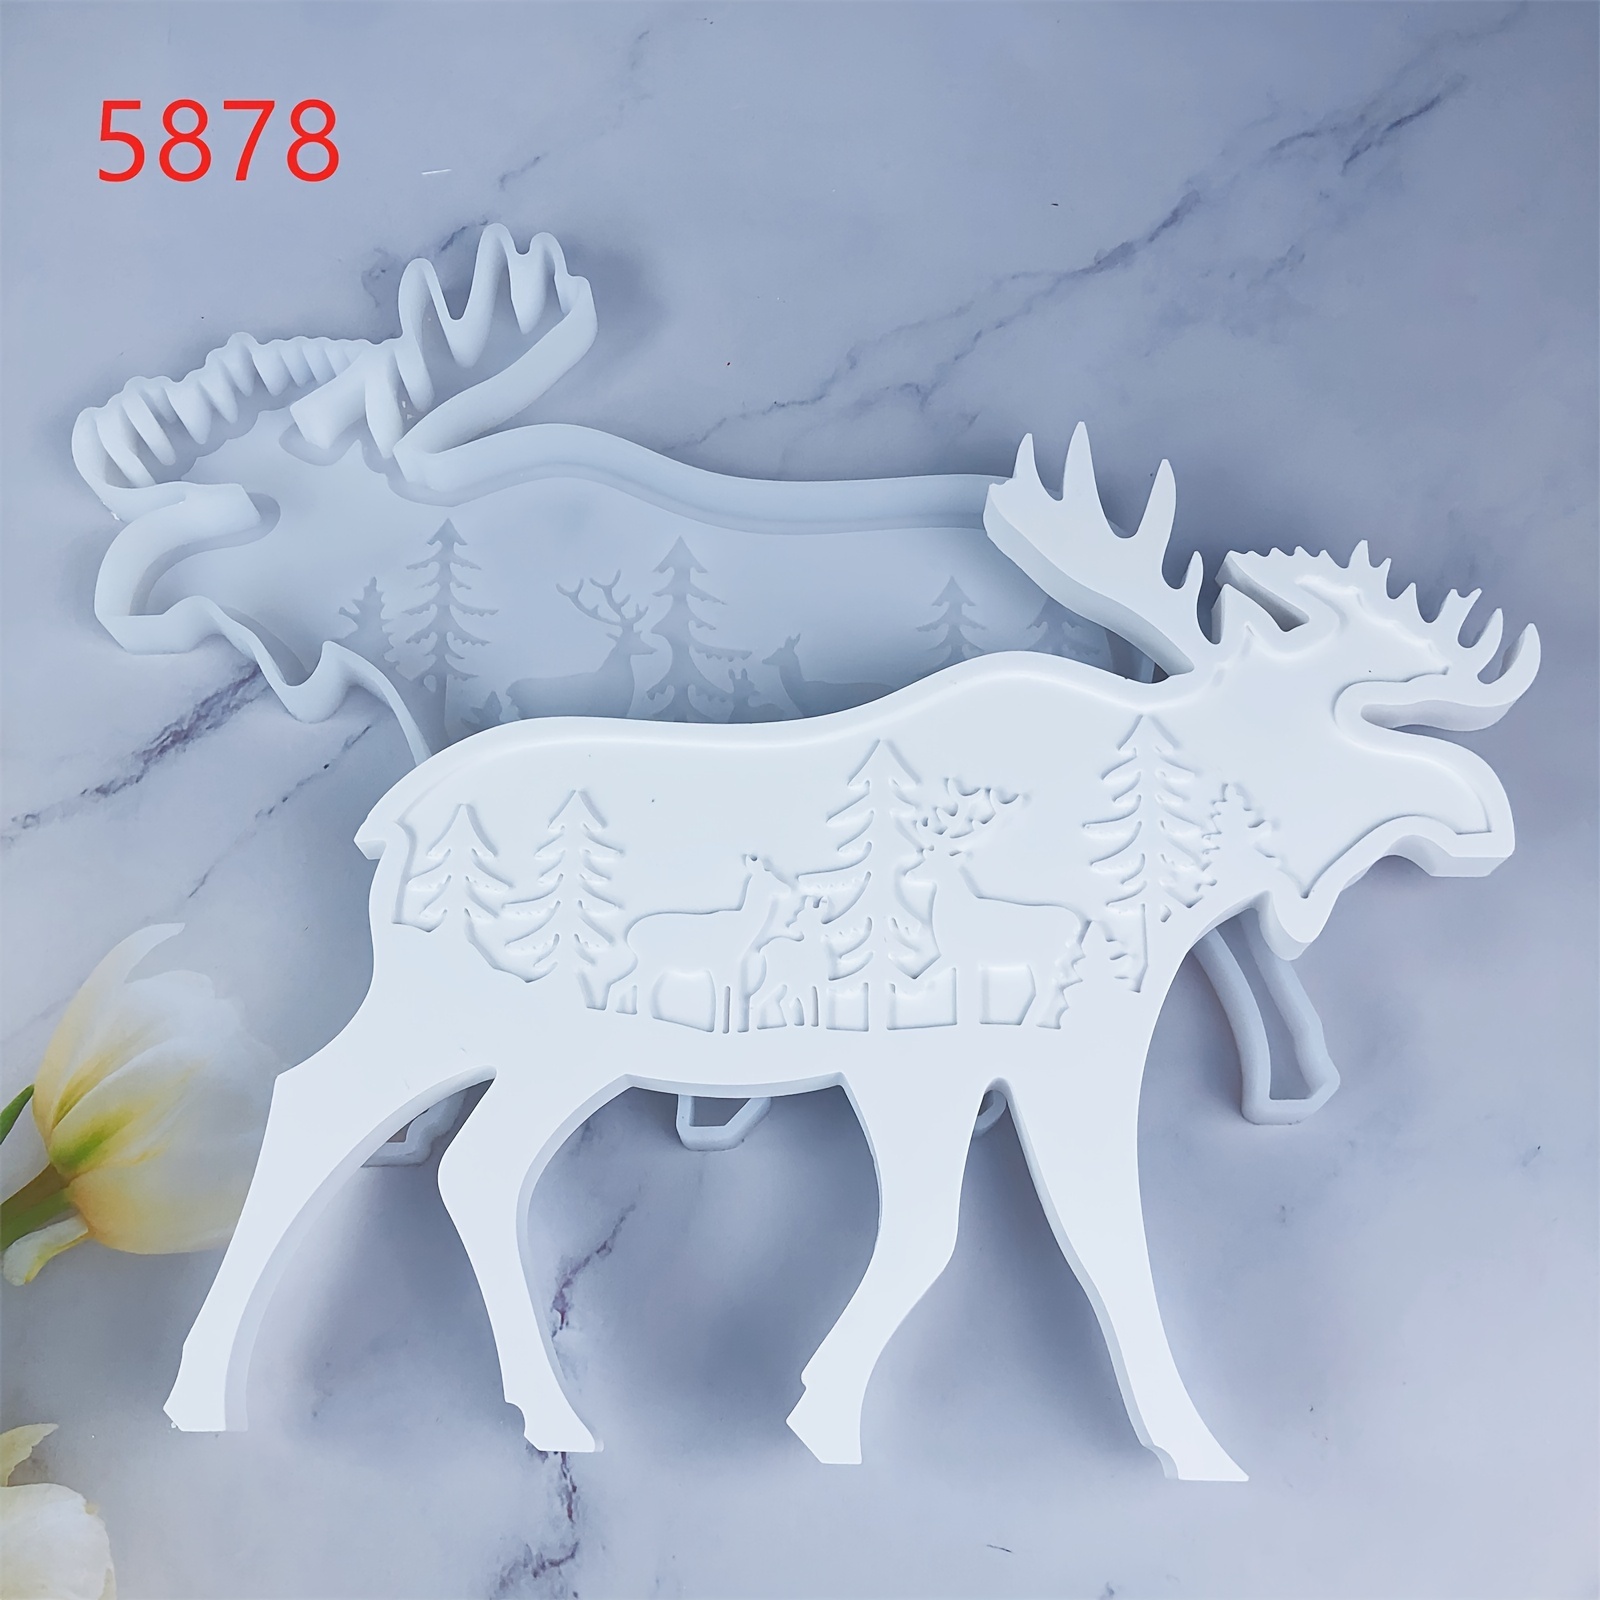 

Silicone Resin Casting Mold - Animal Shape Moose With Forest Scene For Diy Wall Hanging Decor Or Tabletop Display - Durable And Flexible Mold For Resin, Plaster Casting